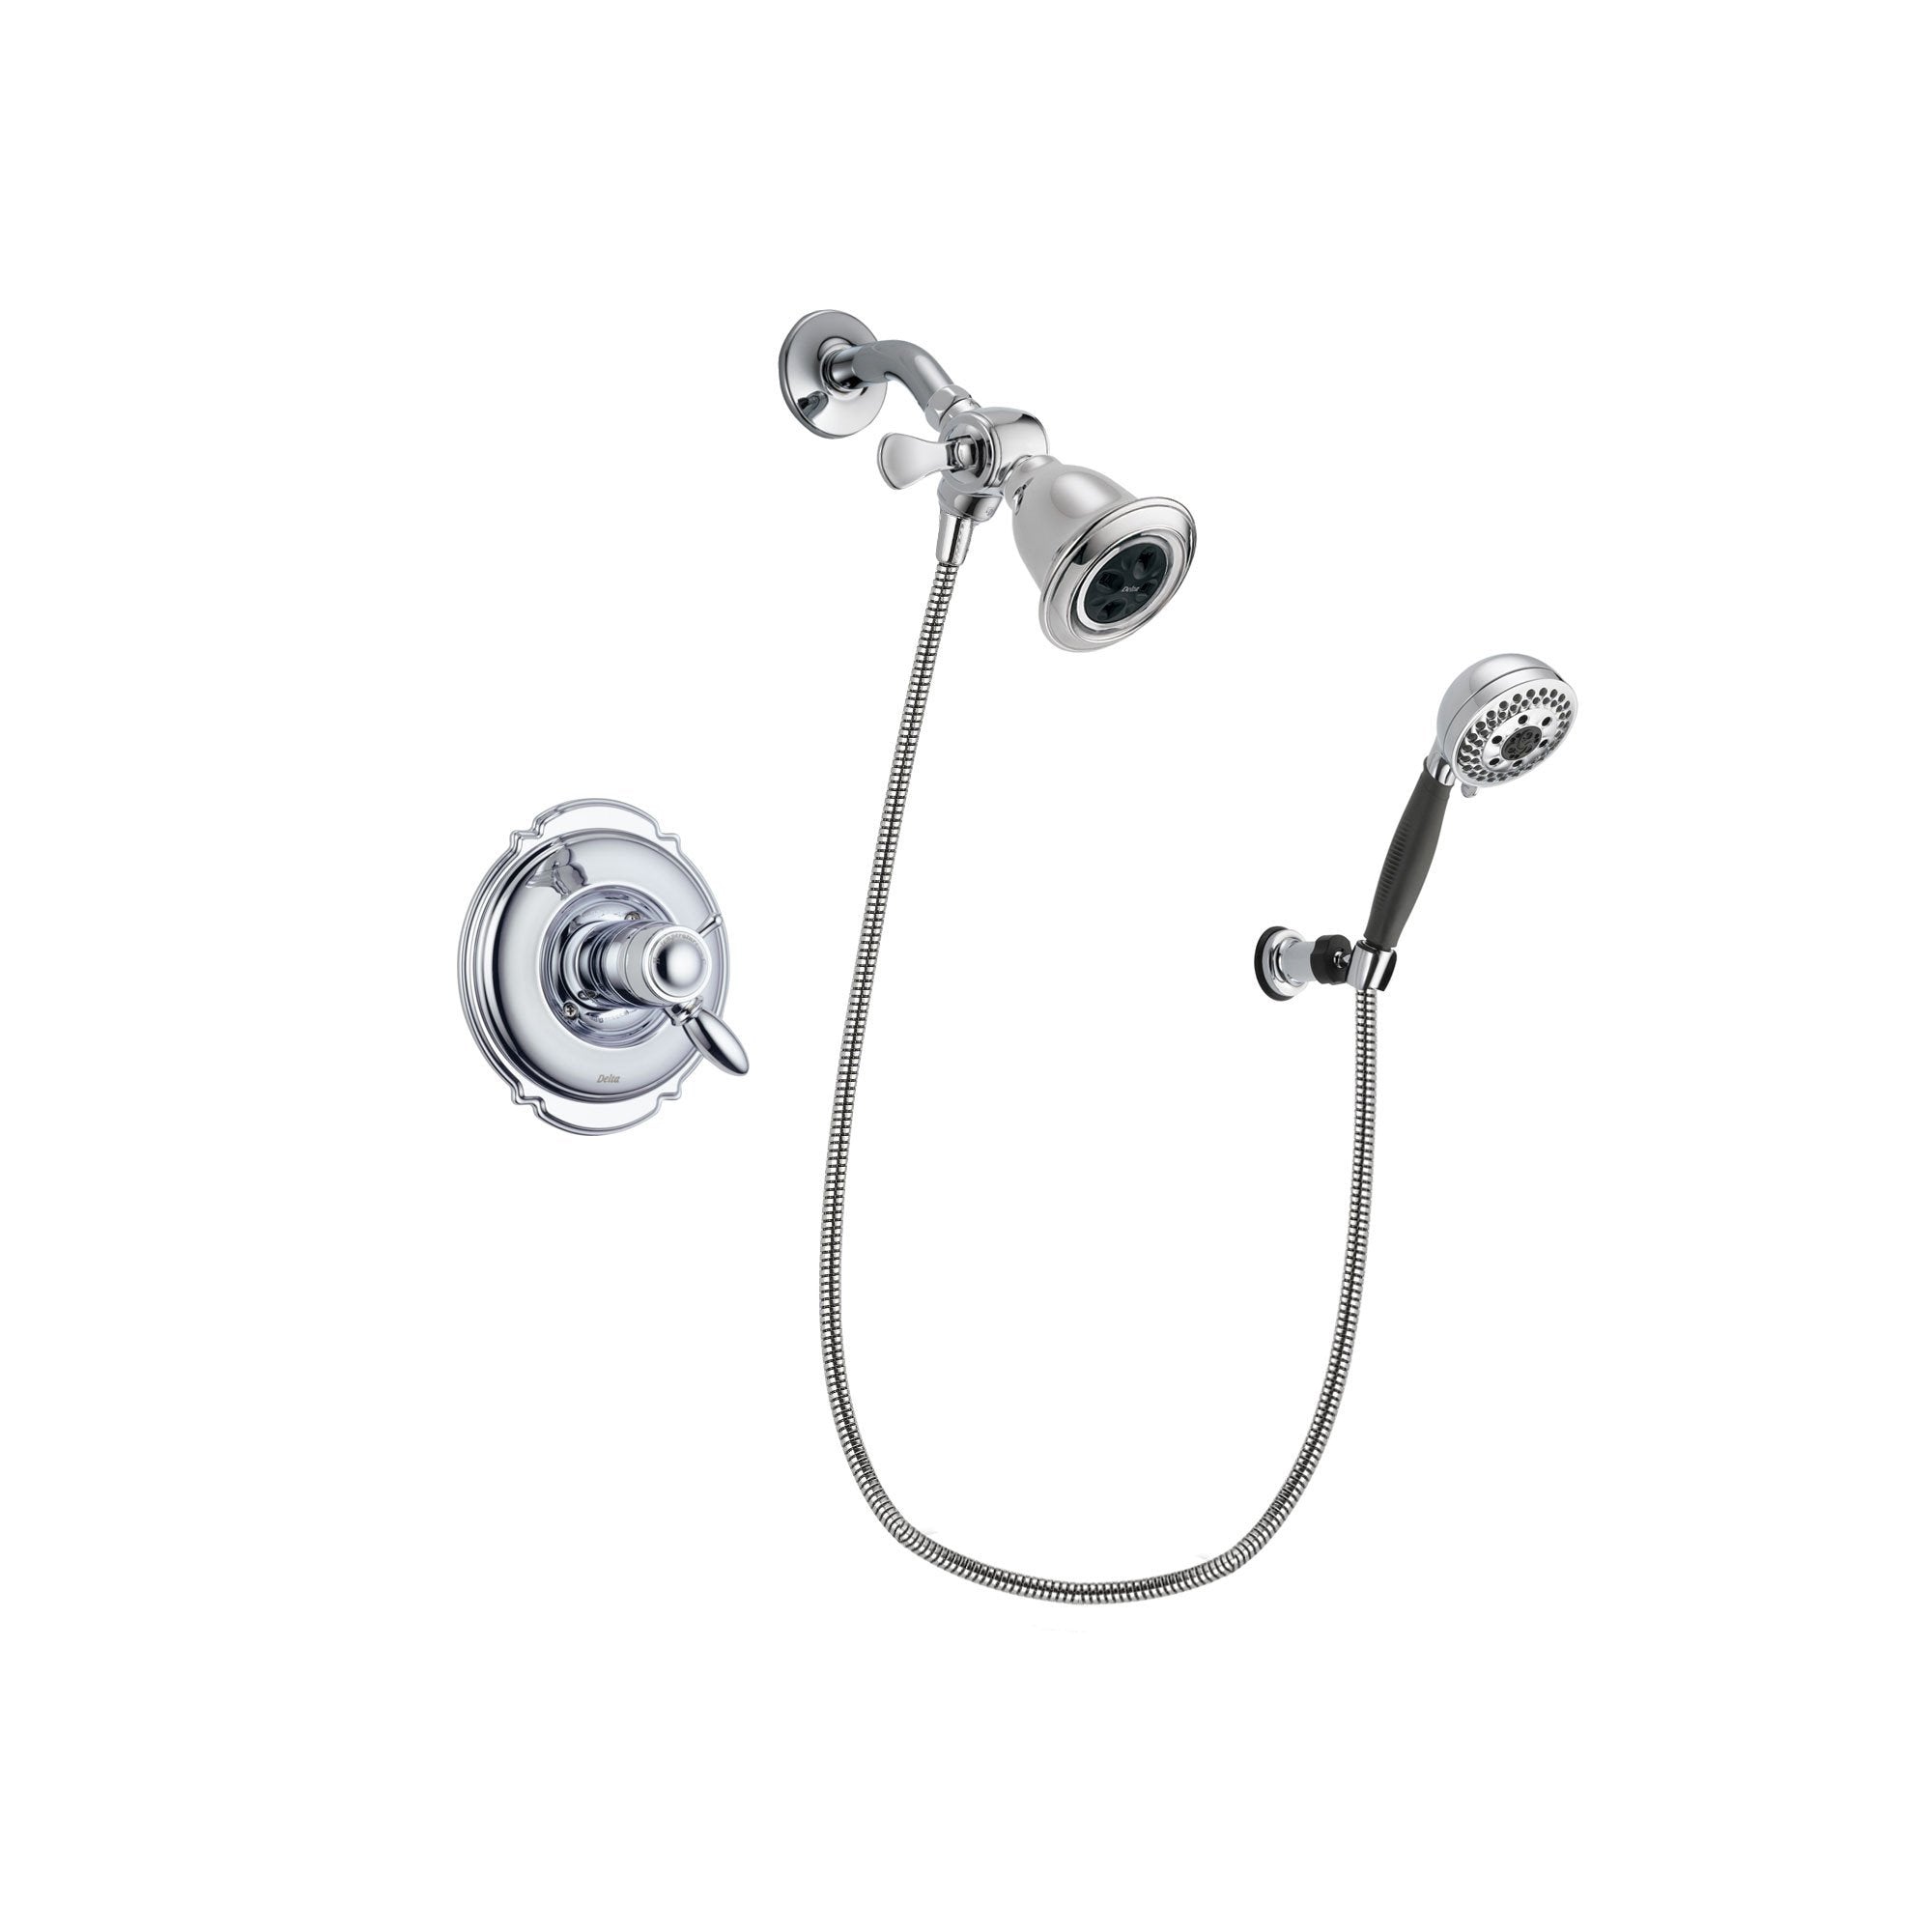 Delta Victorian Chrome Shower Faucet System Package with Hand Shower DSP1142V